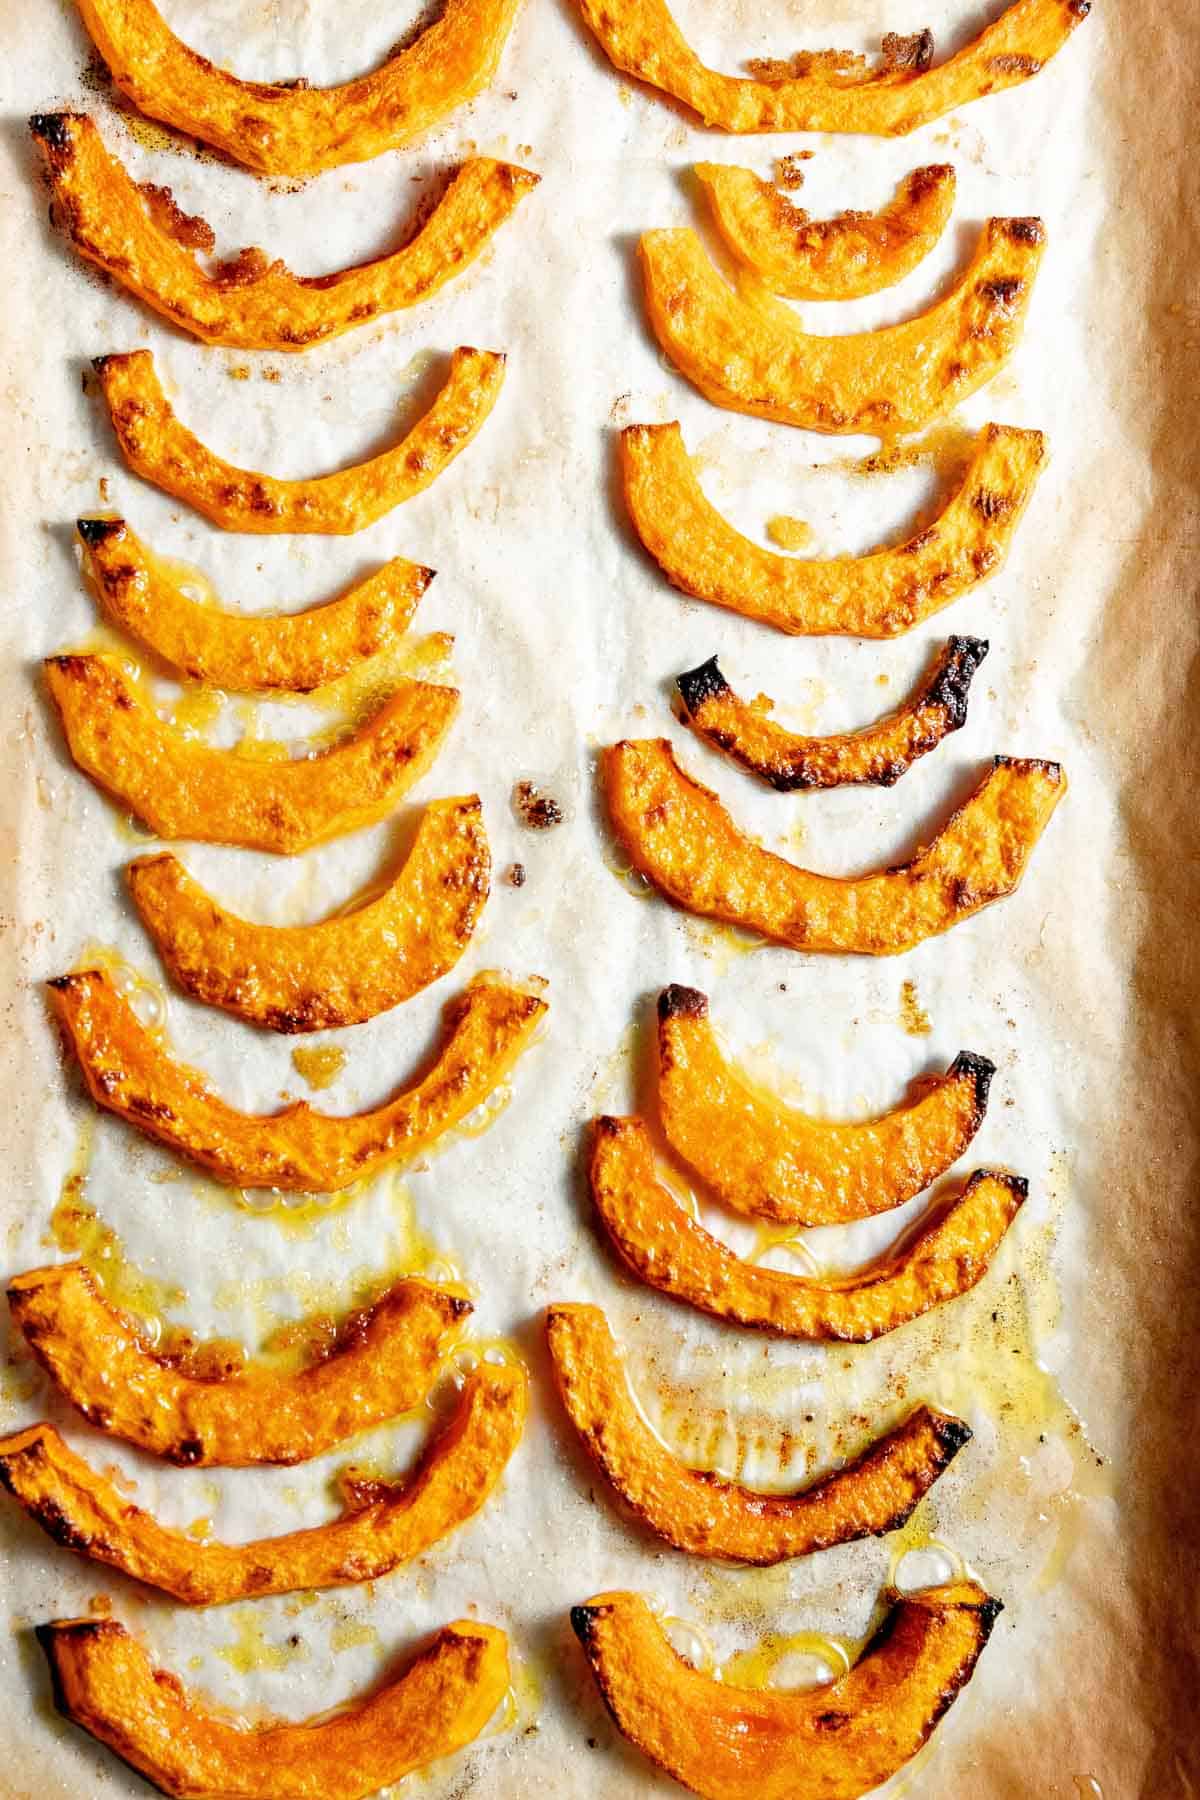 Roasted butternut squash slices on a baking sheet.